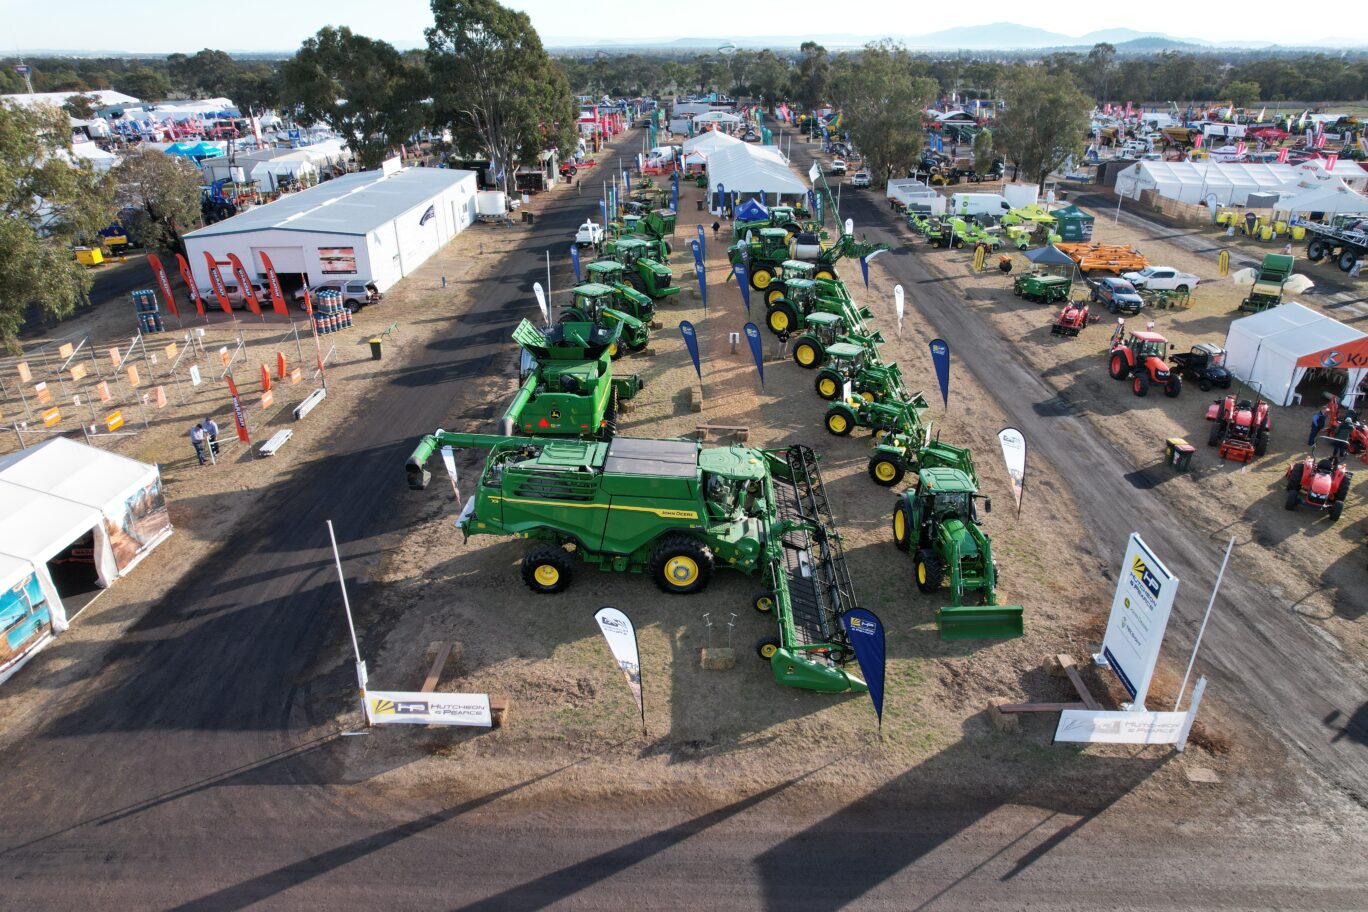 Agquip event